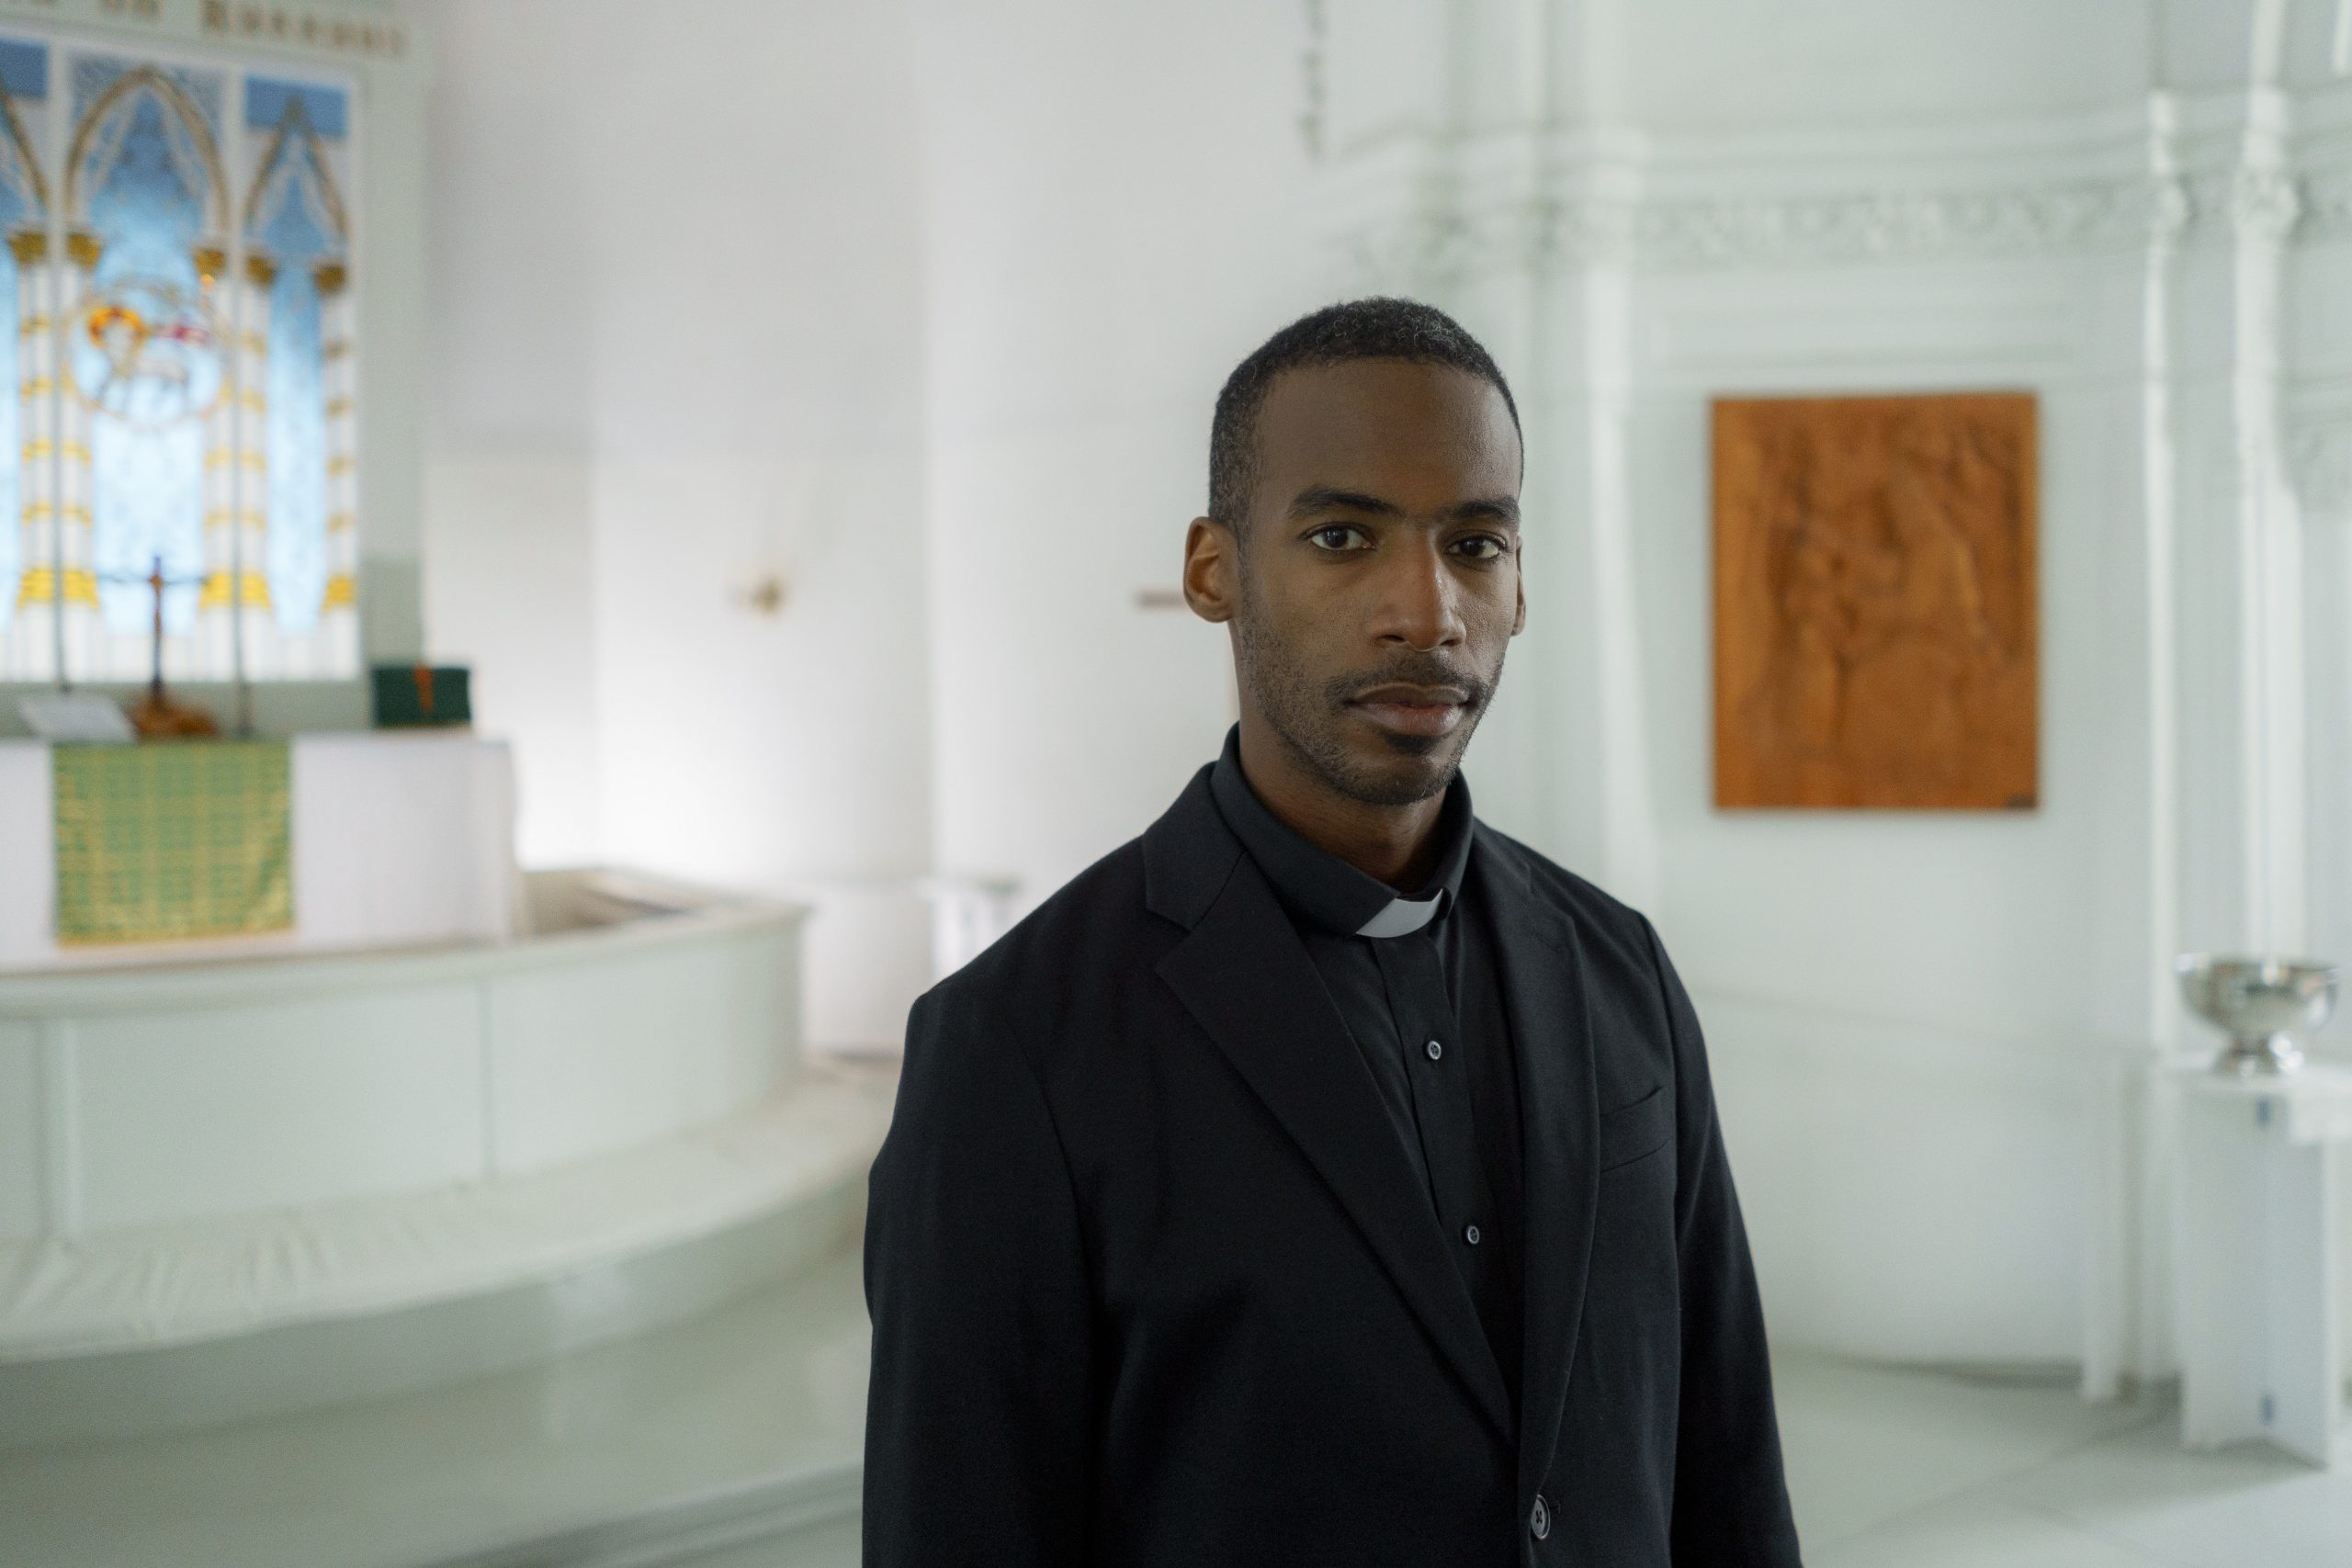 A Black priest wearing a black top and white collar looks directly into the camera in his church.